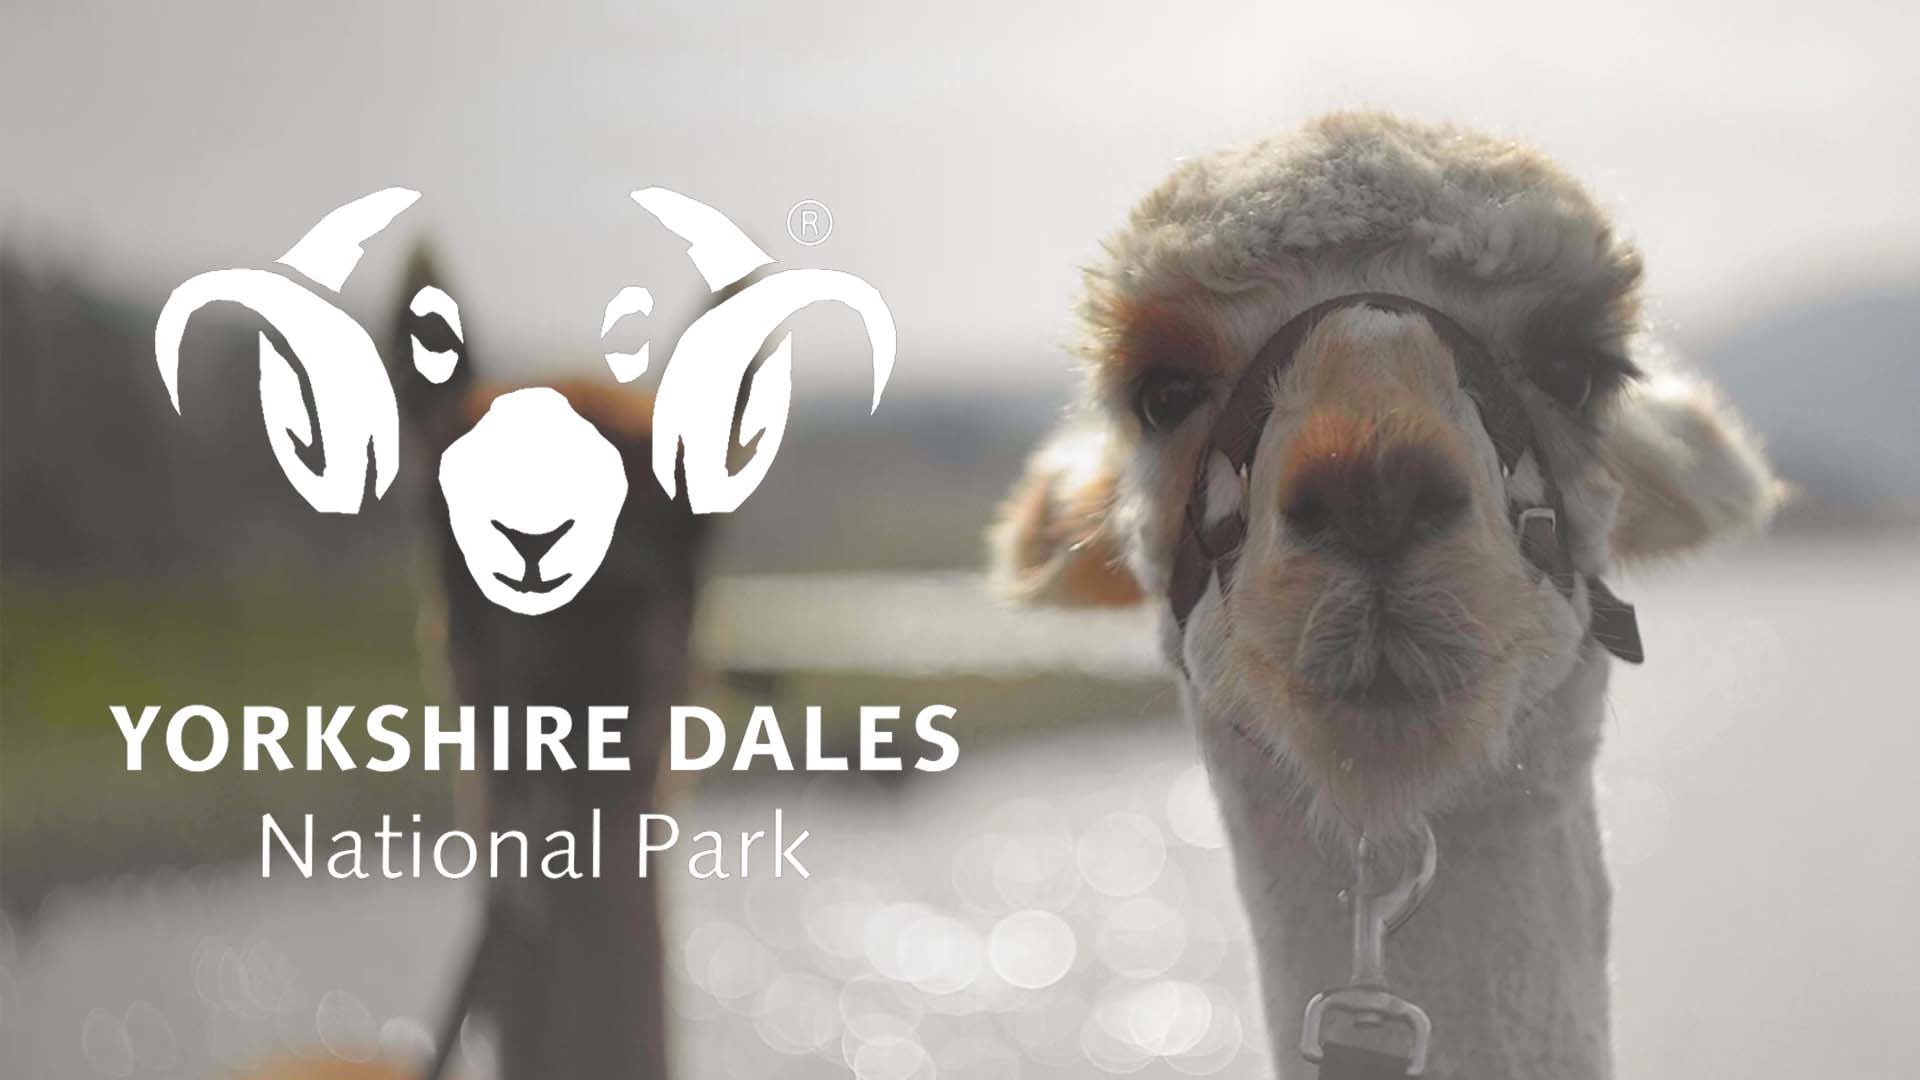 Walking with Alpacas | Yorkshire Dales National Park